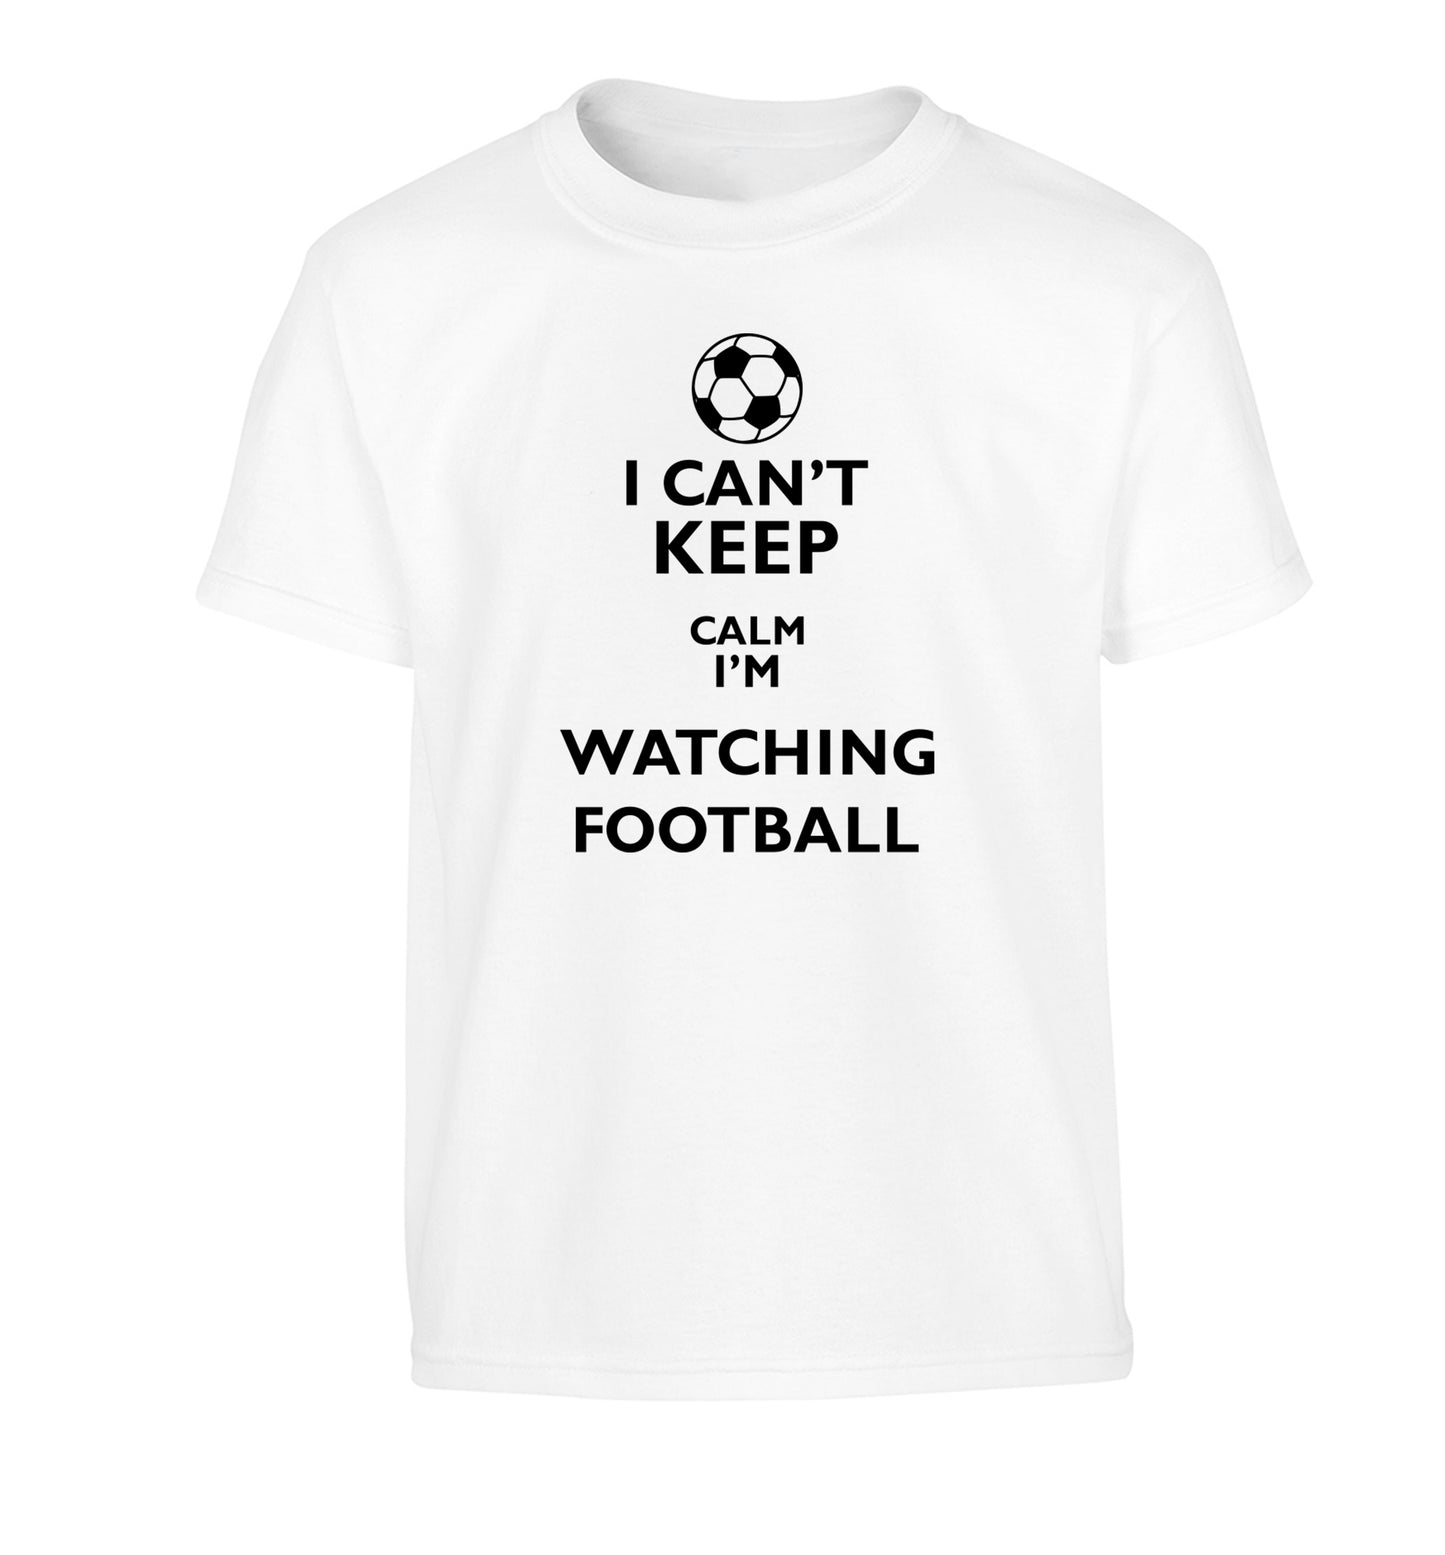 I can't keep calm I'm watching the football Children's white Tshirt 12-14 Years